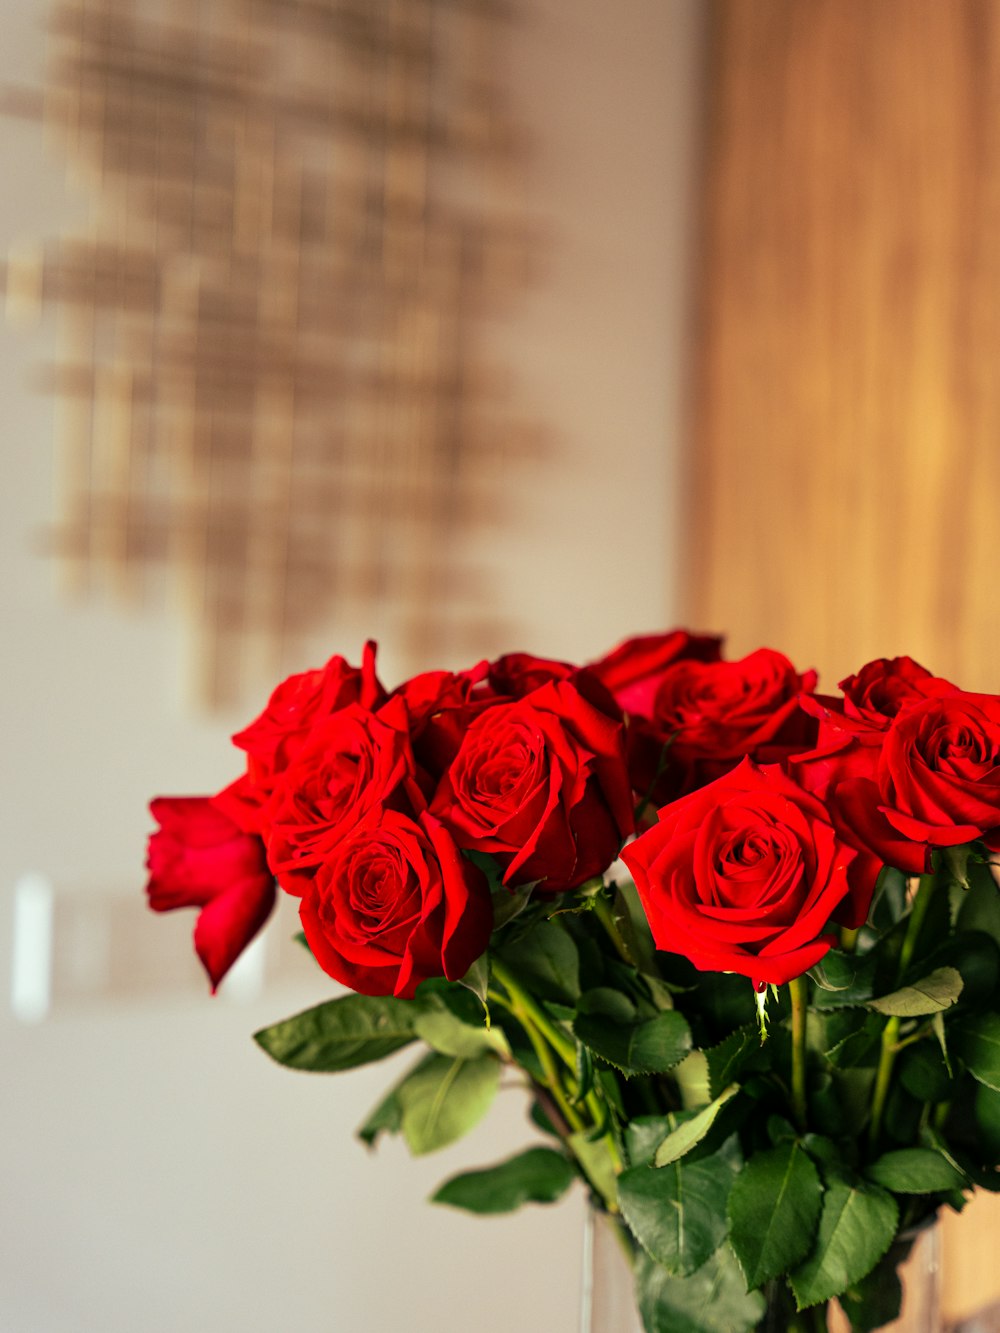 550+ Red Roses Pictures | Download Free Images on Unsplash